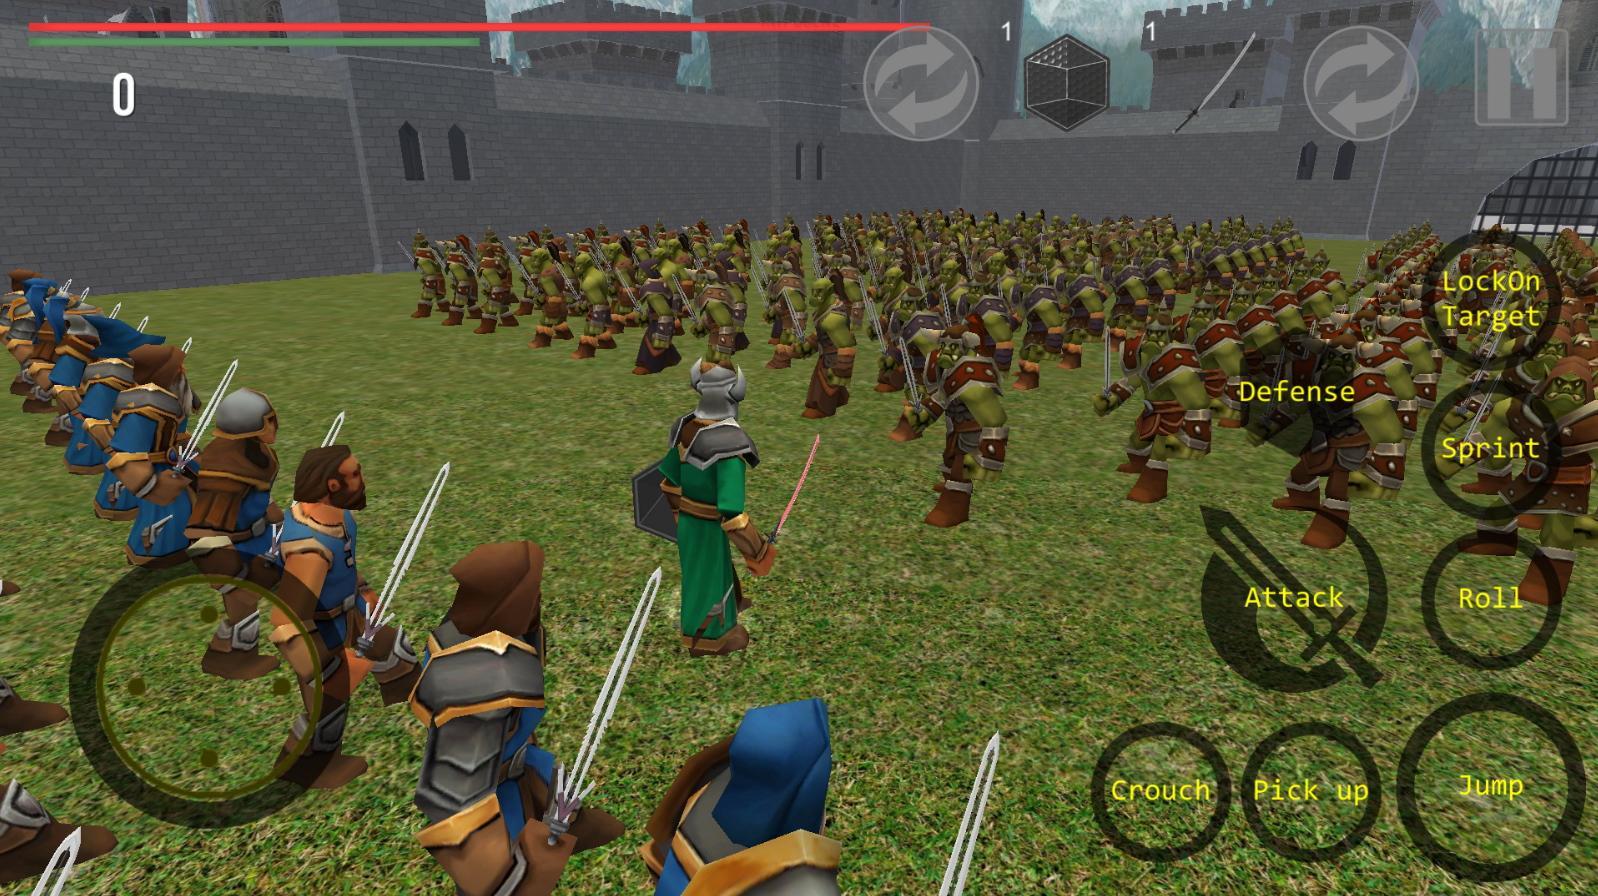 Screenshot 1 of Middle Earth: Battle for Rohan 1.8